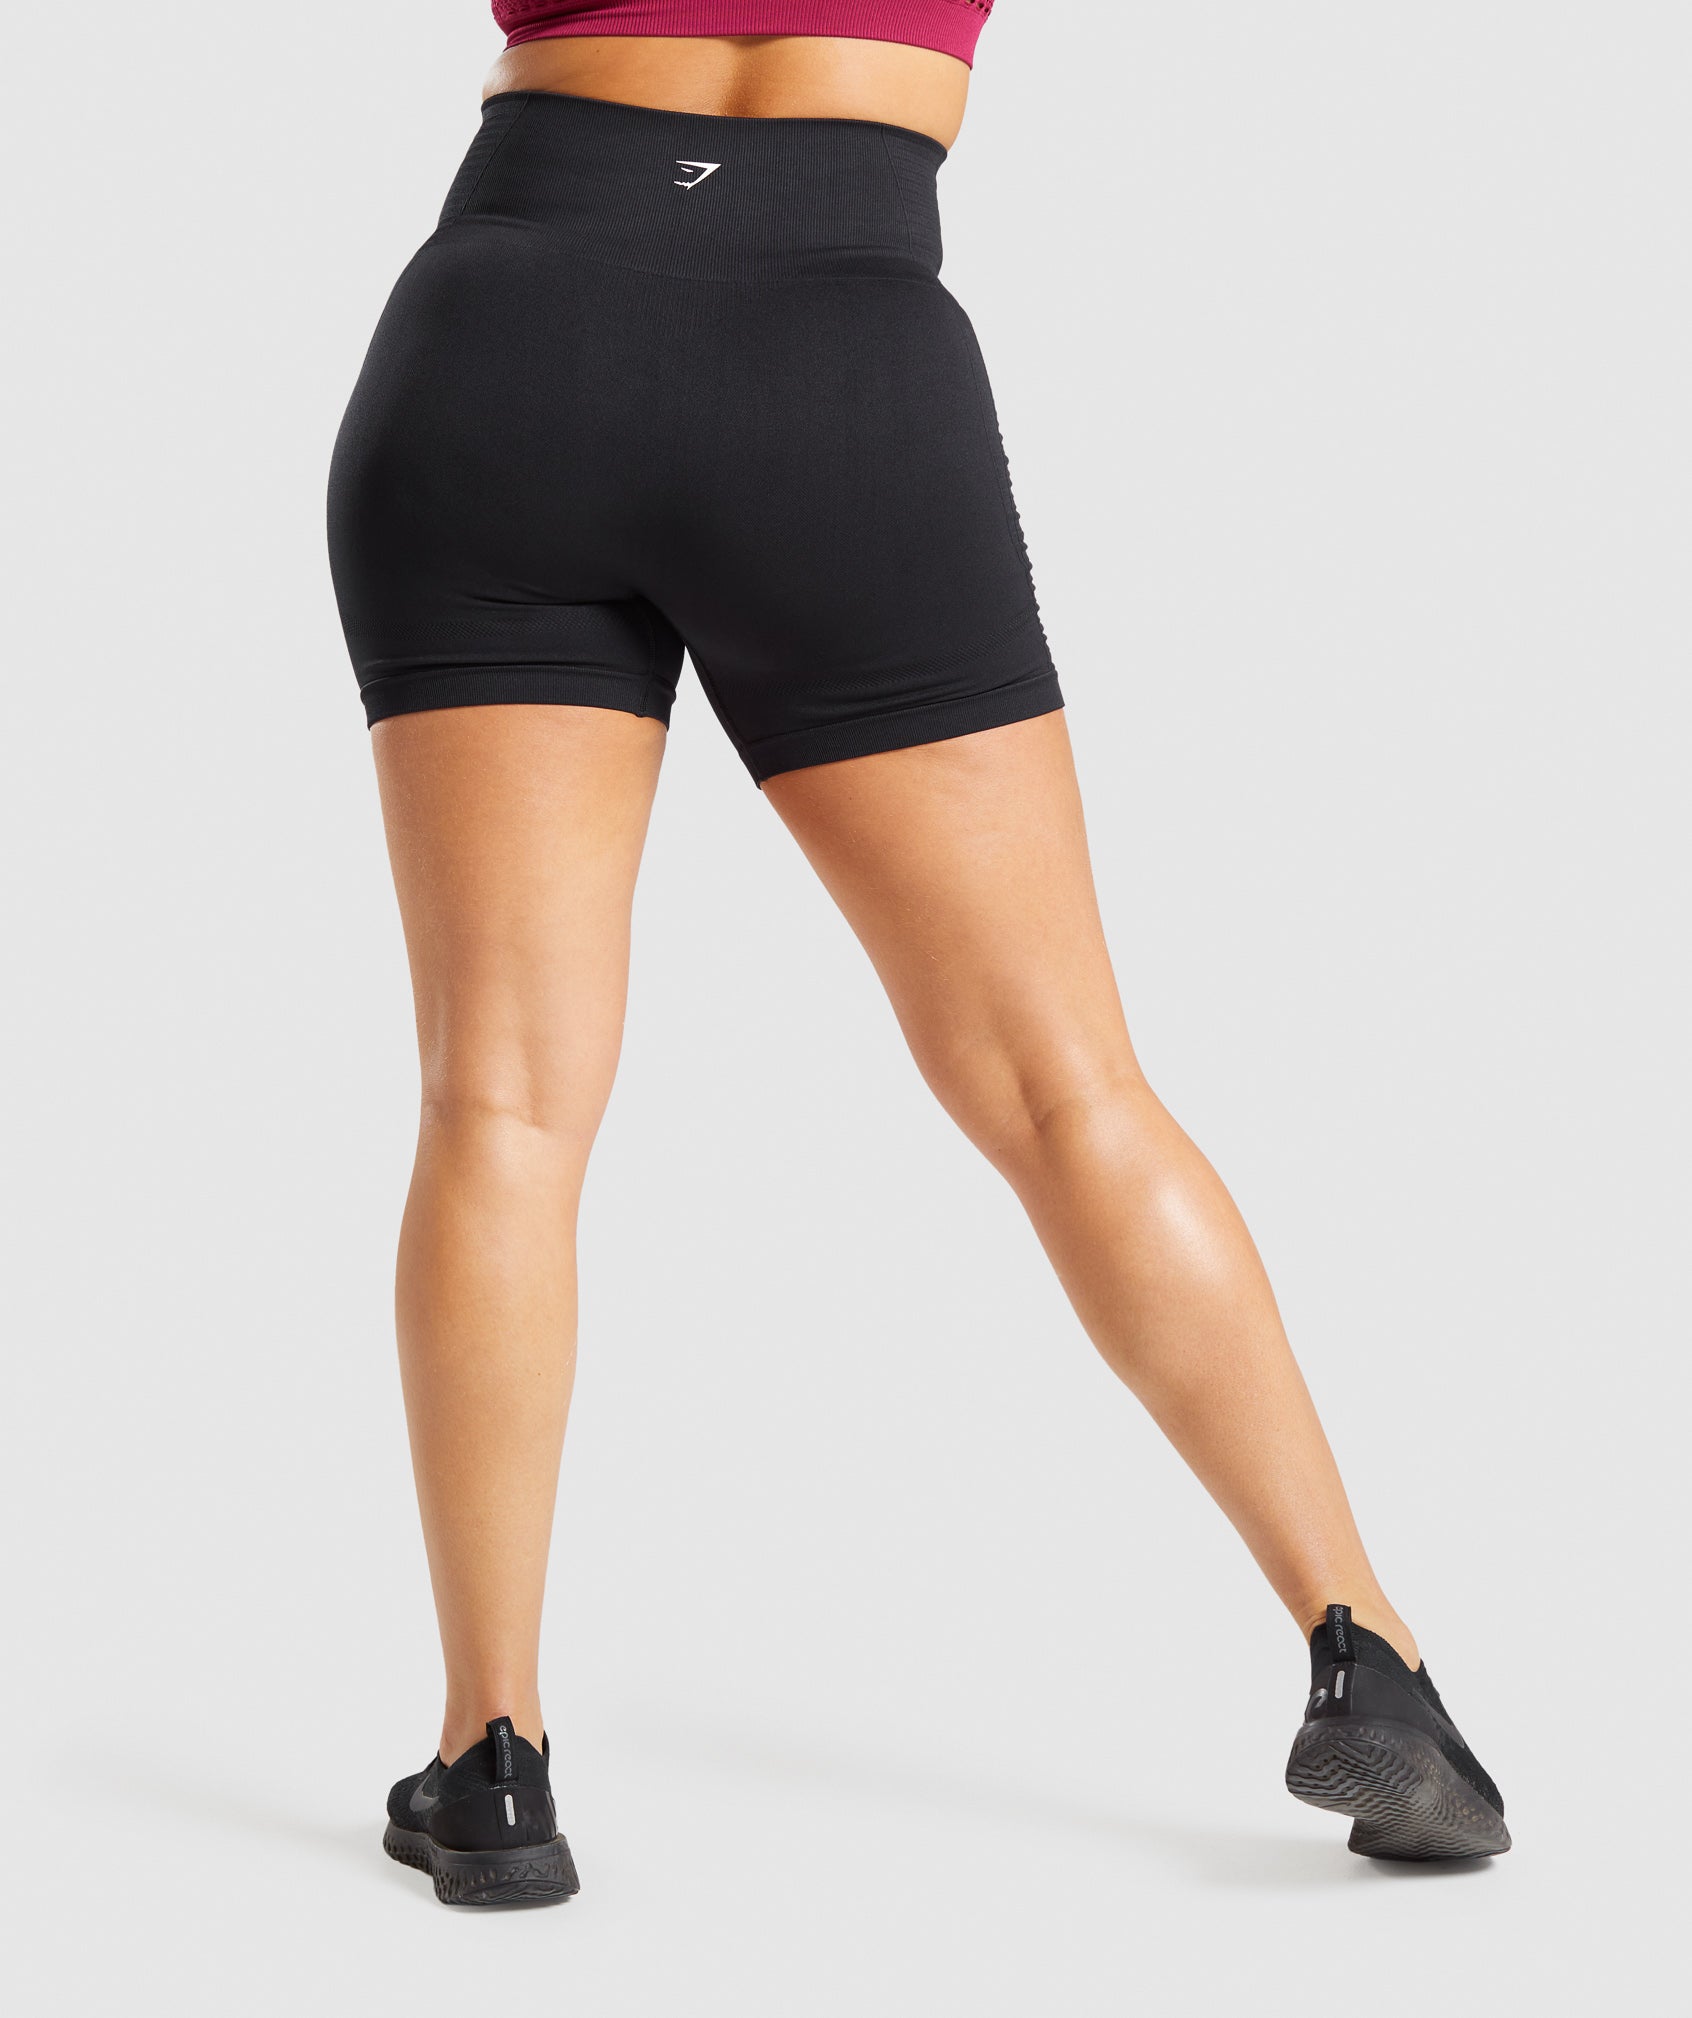 Energy+ Seamless Shorts in Black - view 3